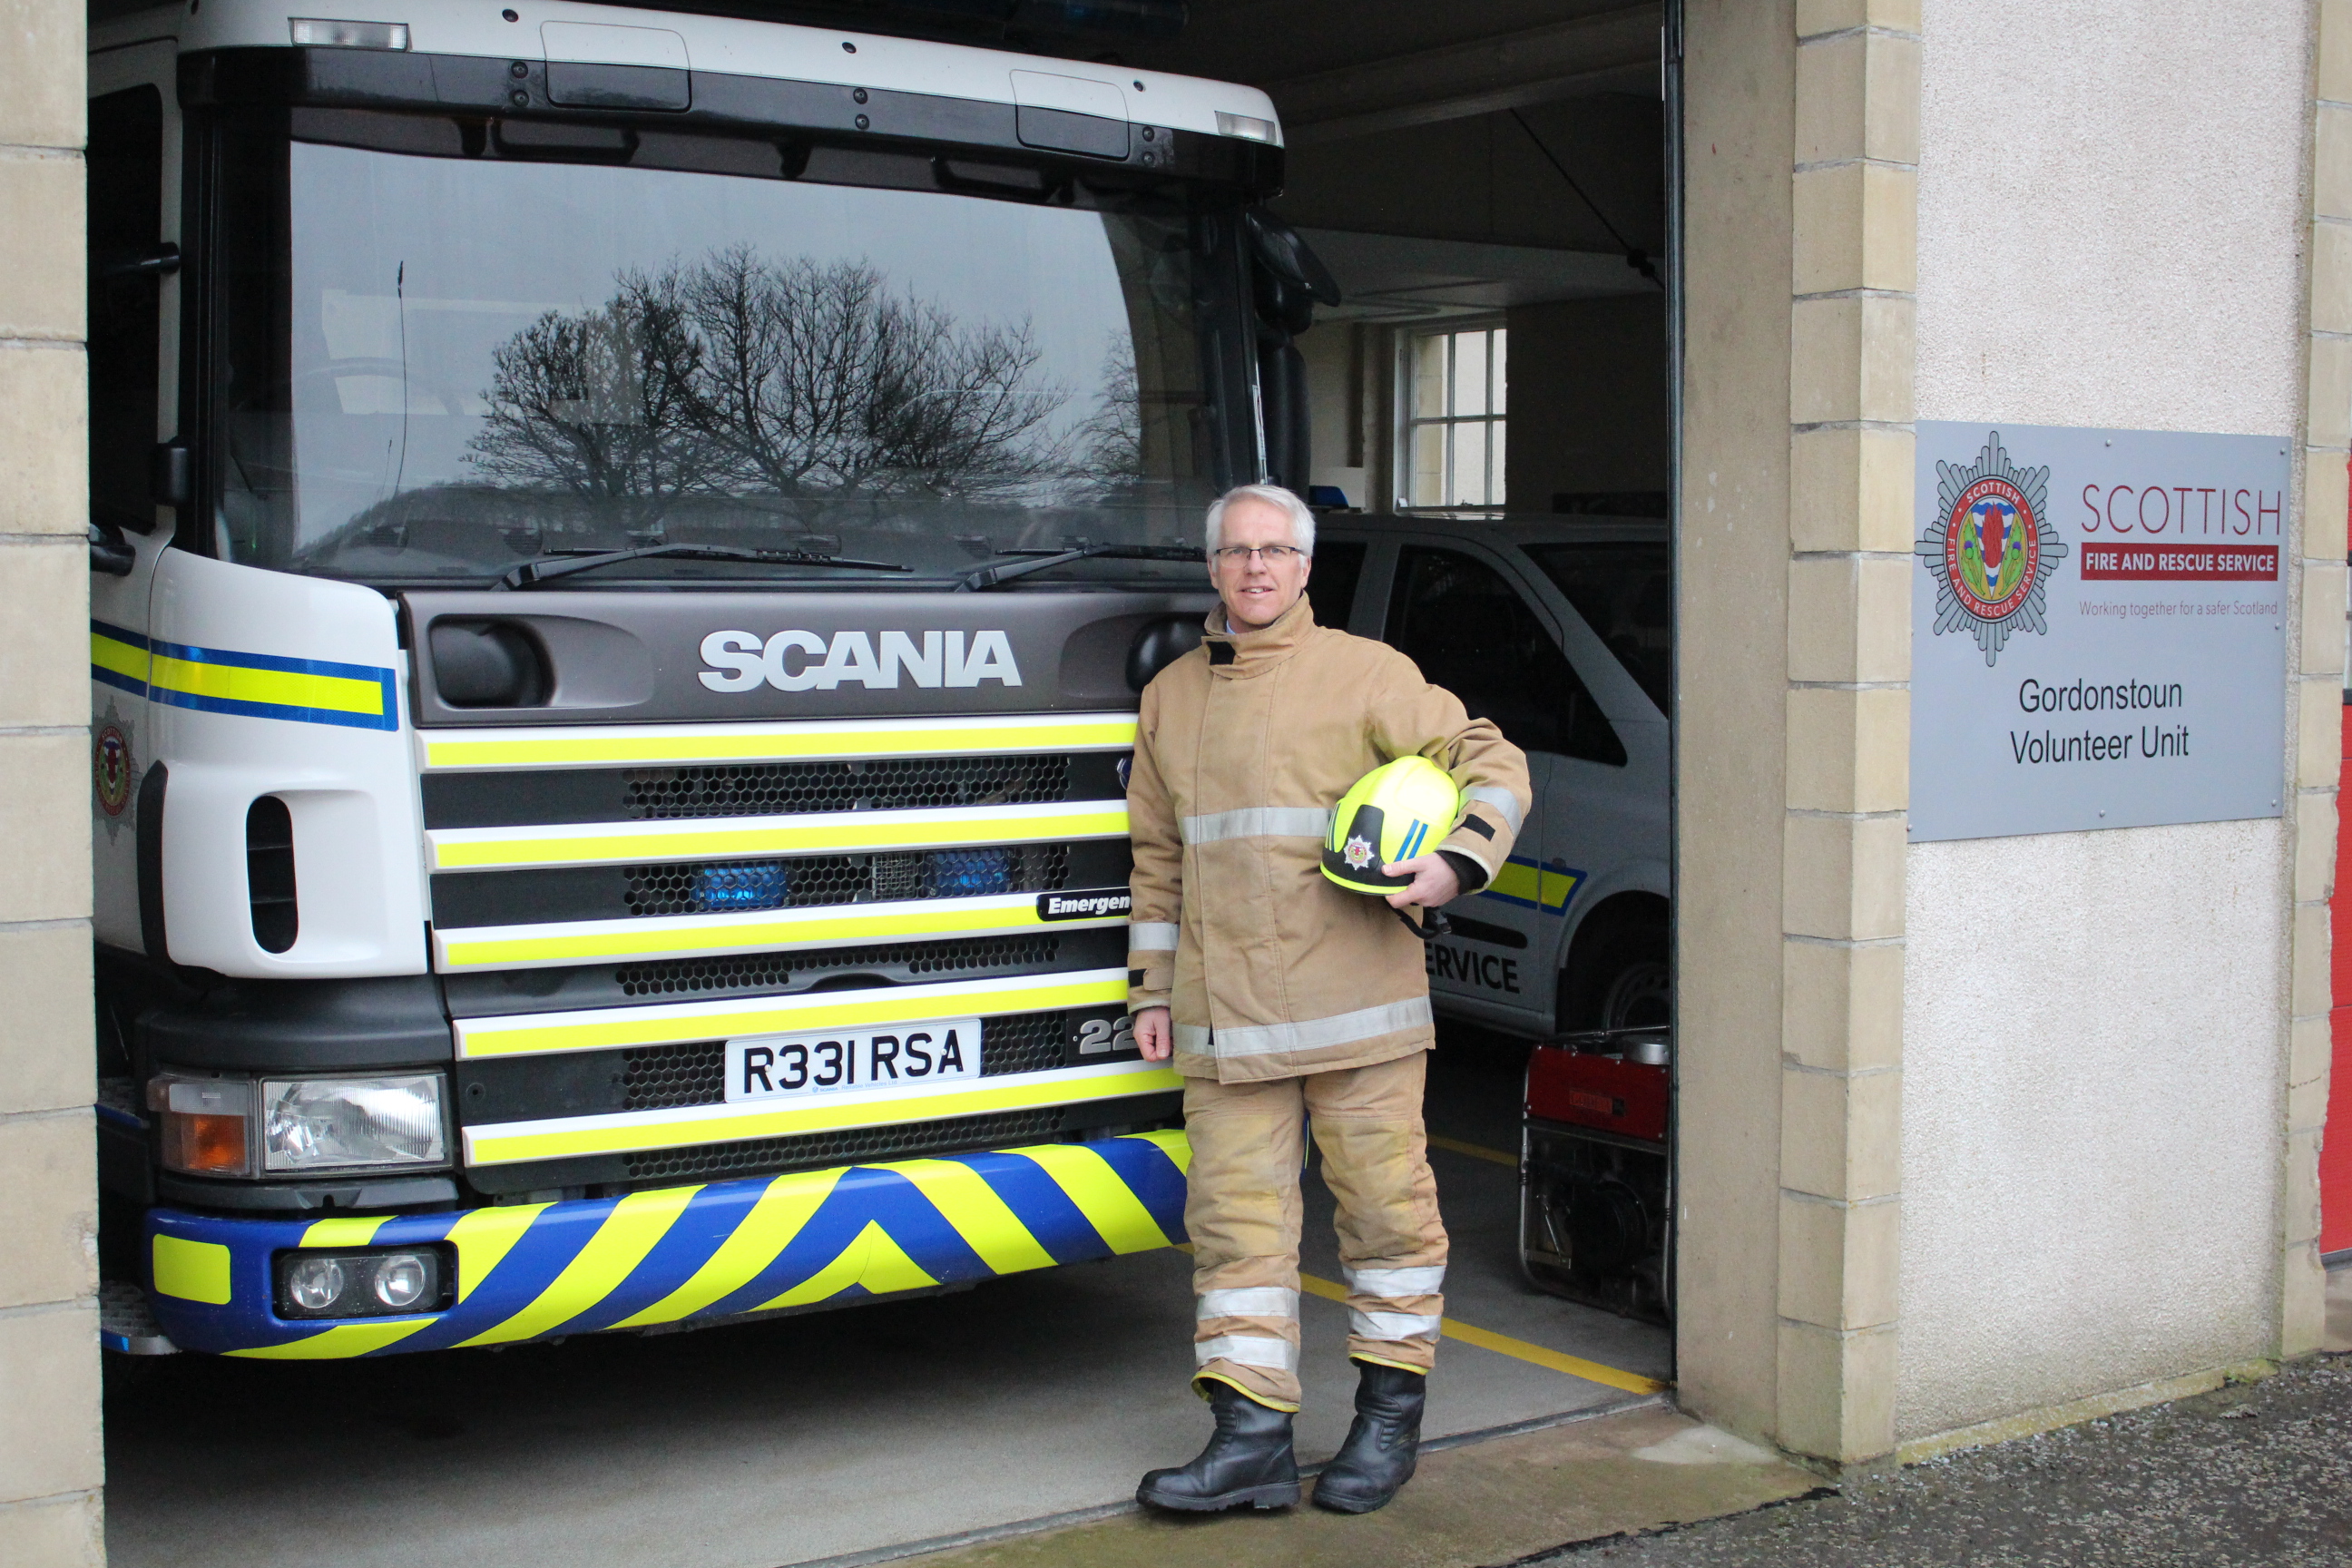 Richard Devey first volunteered his services with the local fire crew when he began working as a teacher at the Moray boarding school in 1992.